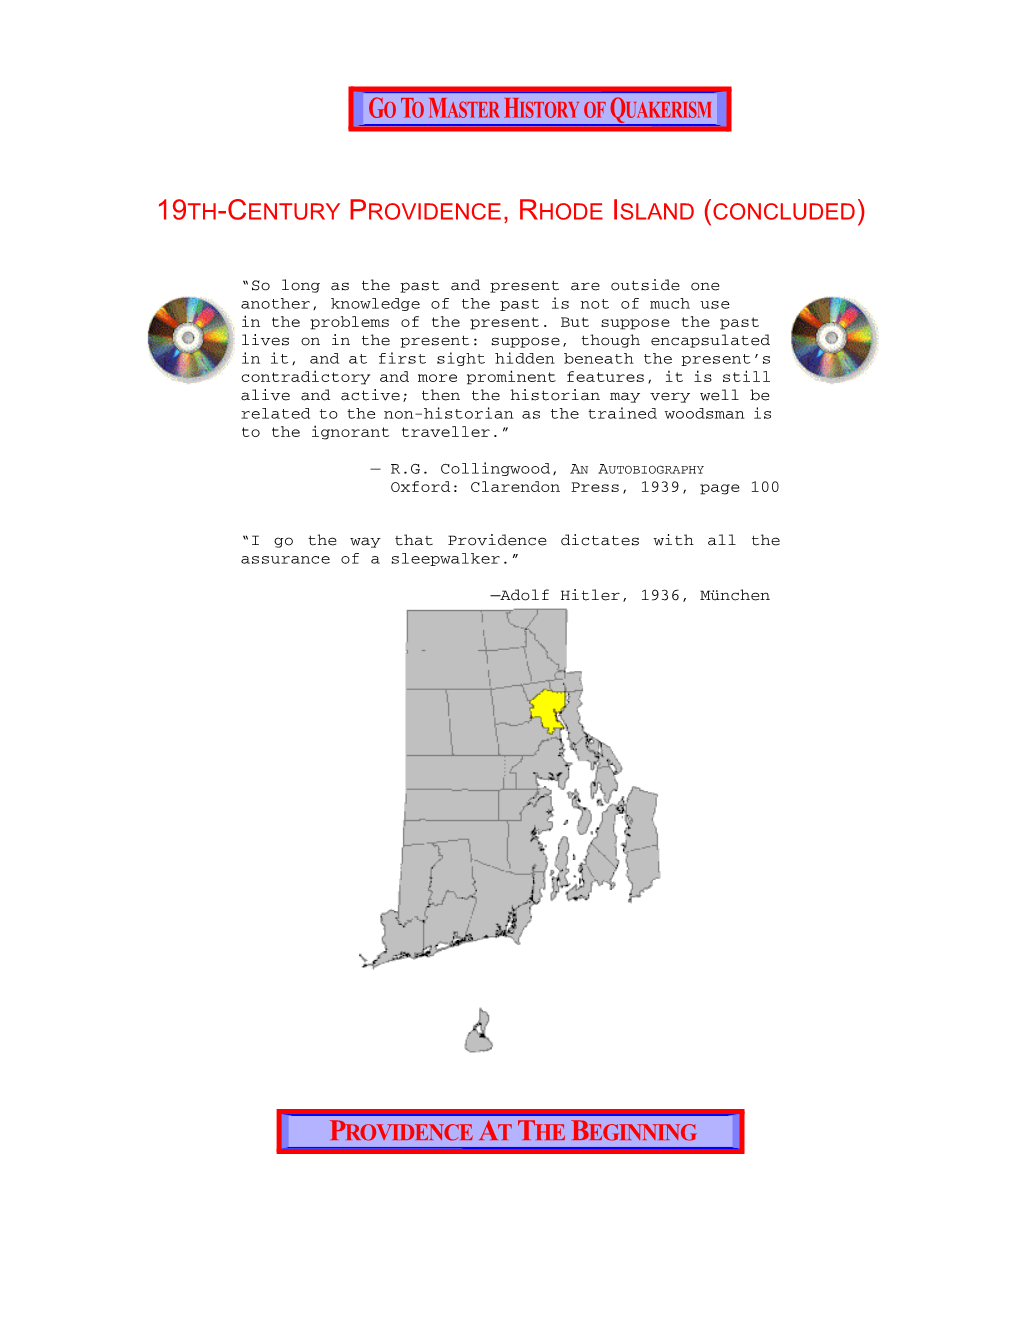 Providence, Rhode Island (Concluded)